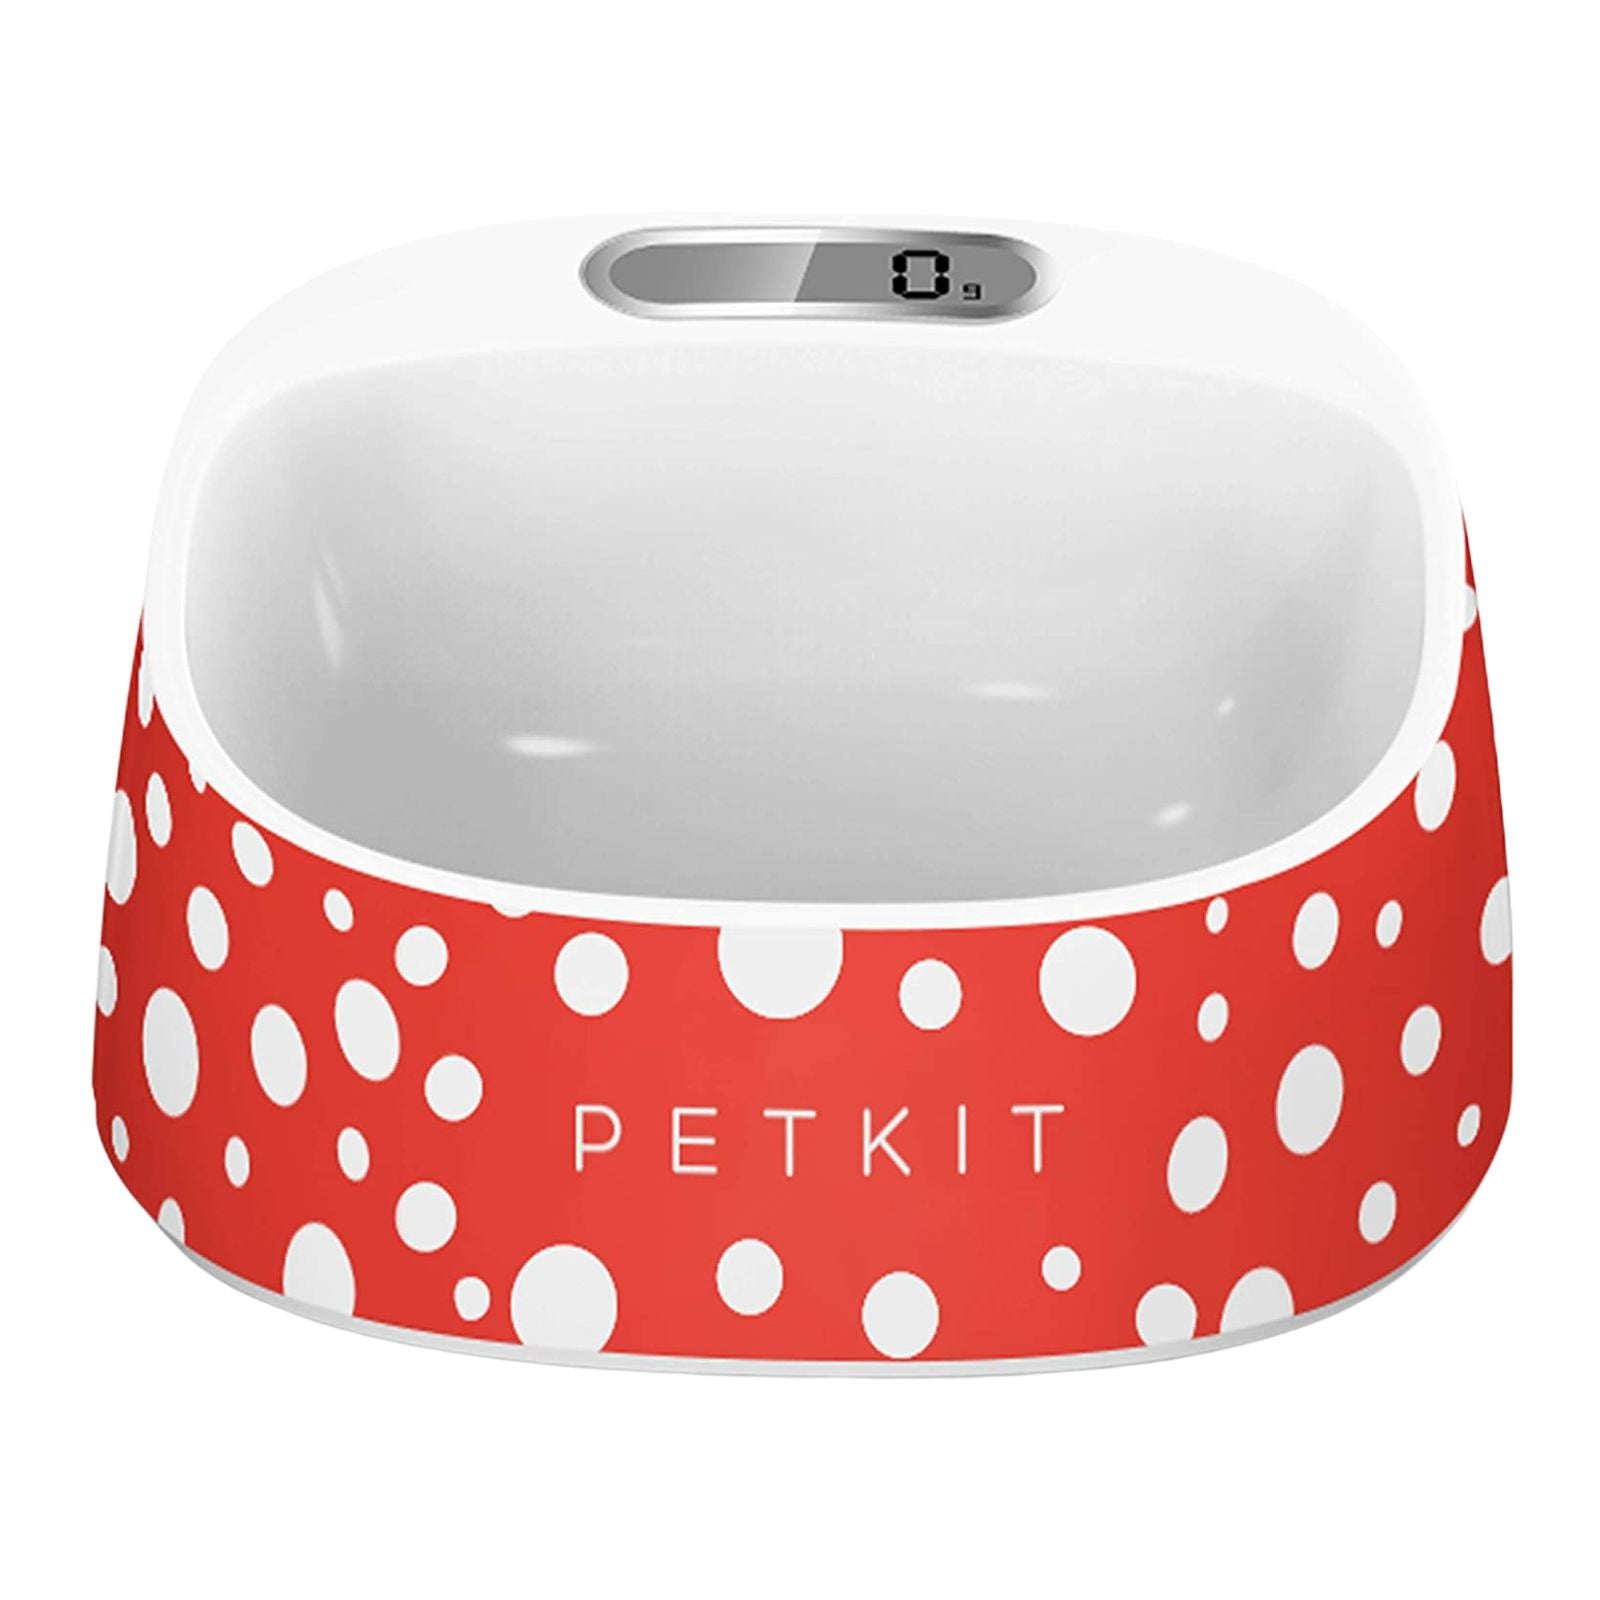 PETKIT Fresh Smart Antibacterial Pet Bowl, featuring a digital scale and a polka dot design.